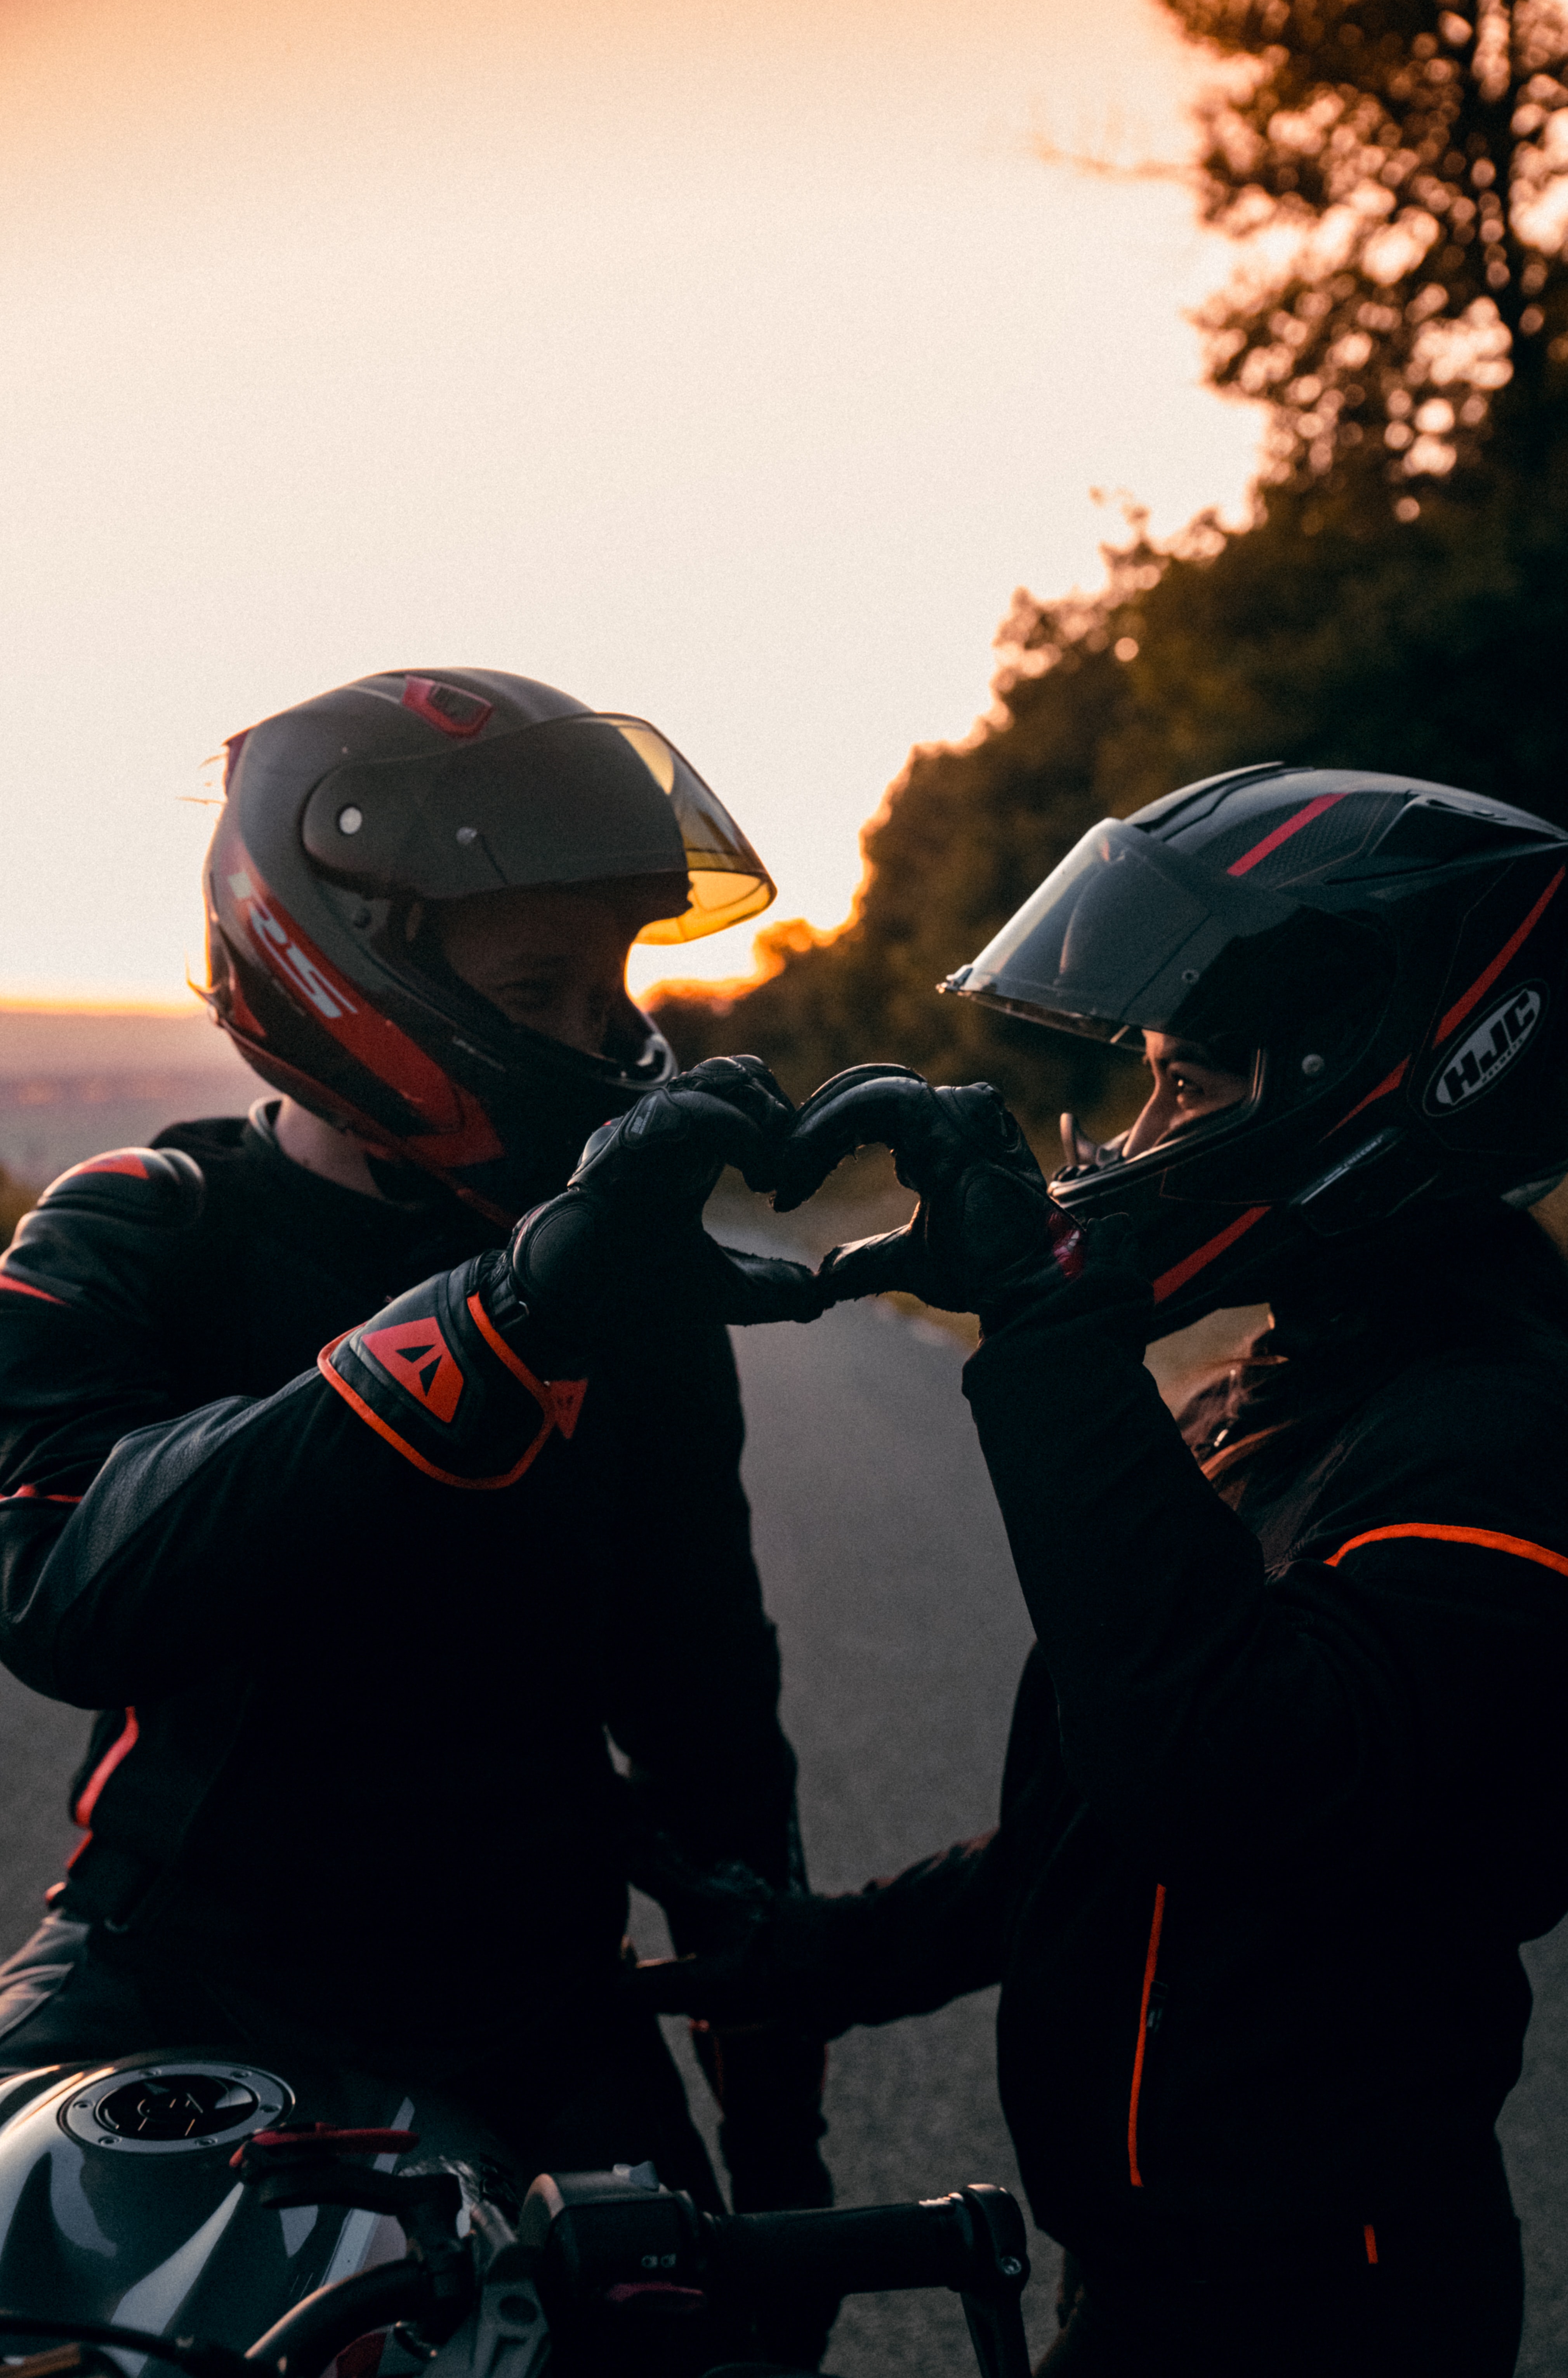 motorcycles, helmet, love, motorcycle, equipment, outfit, motorcyclists